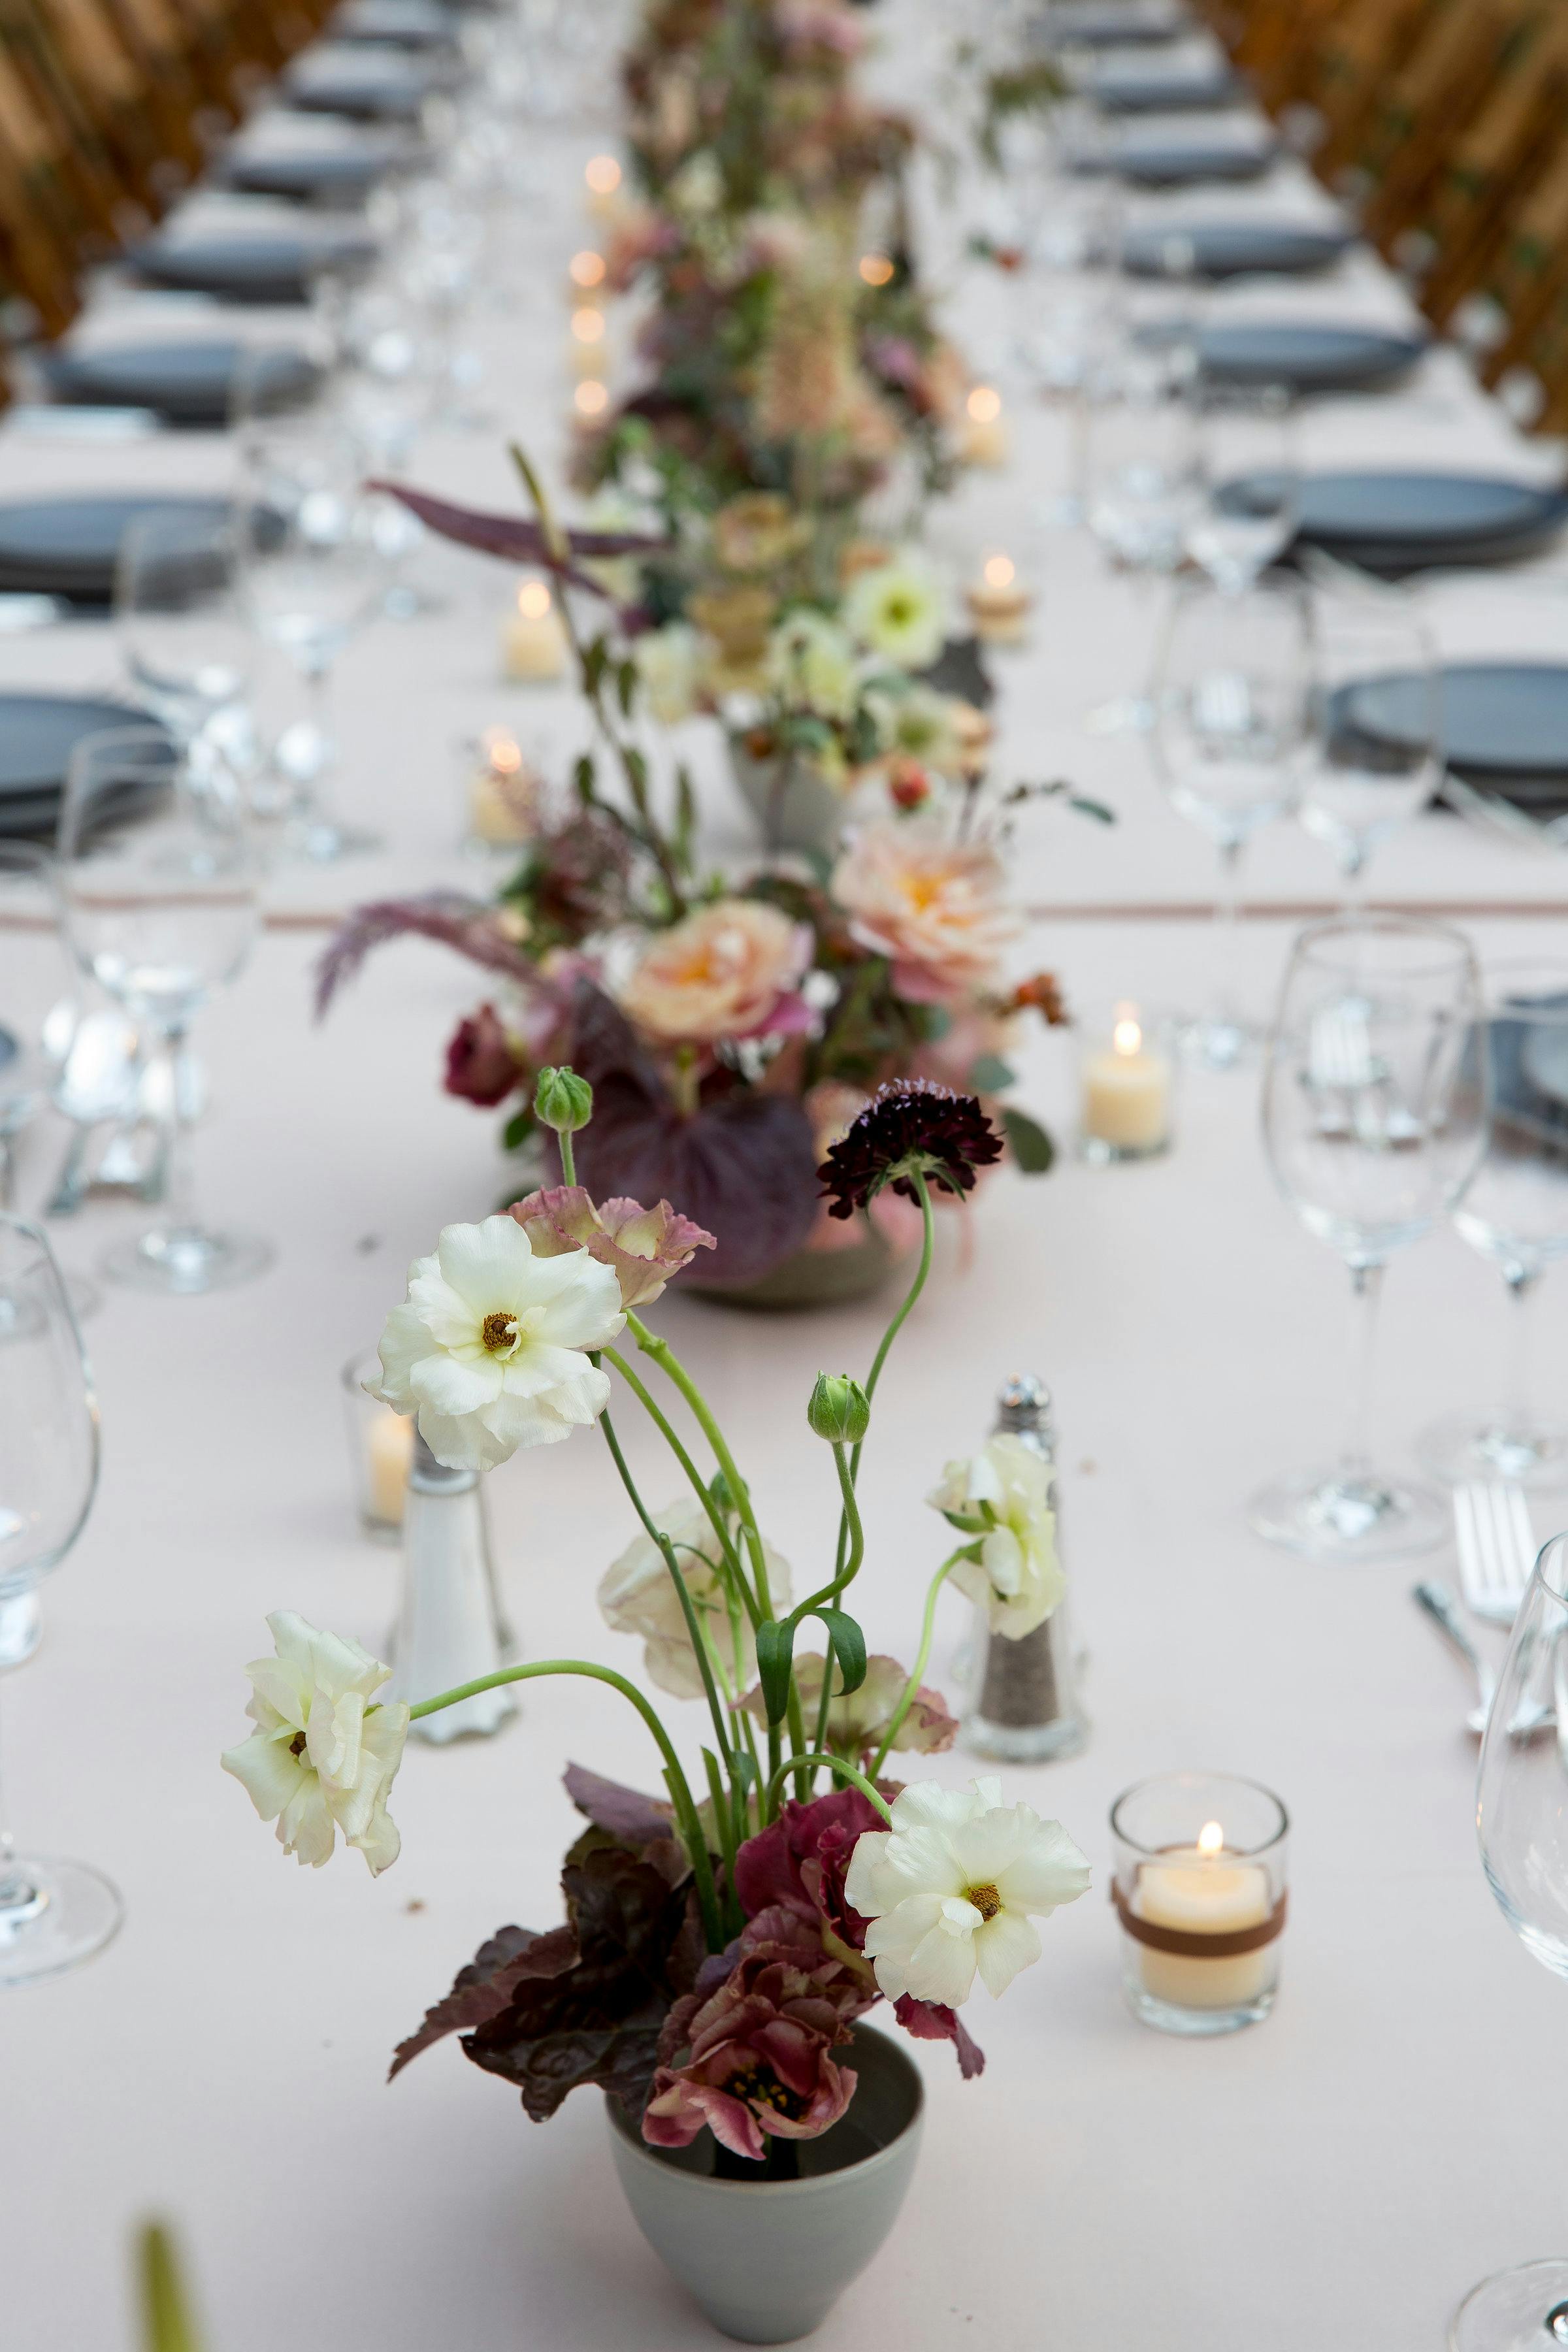 The Art Of Ikebana Minimalist Japanese Floral Design Inspired These 7 Celebrations Partyslate